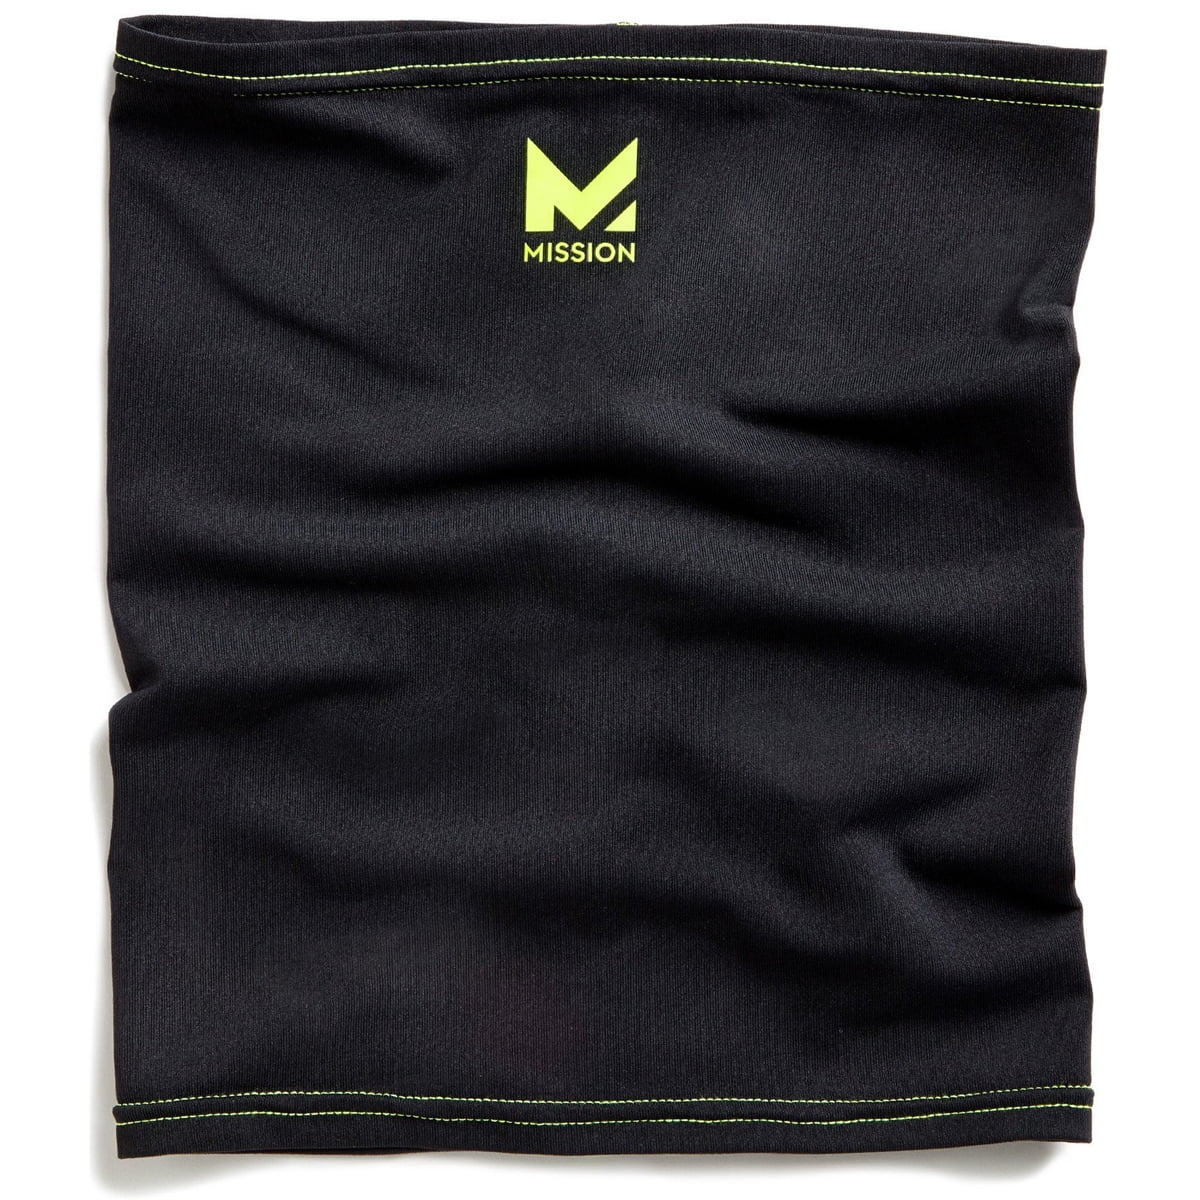 Mission Athletecare HydroActive Fitness Multi-Cool Neck Gaiter - 9